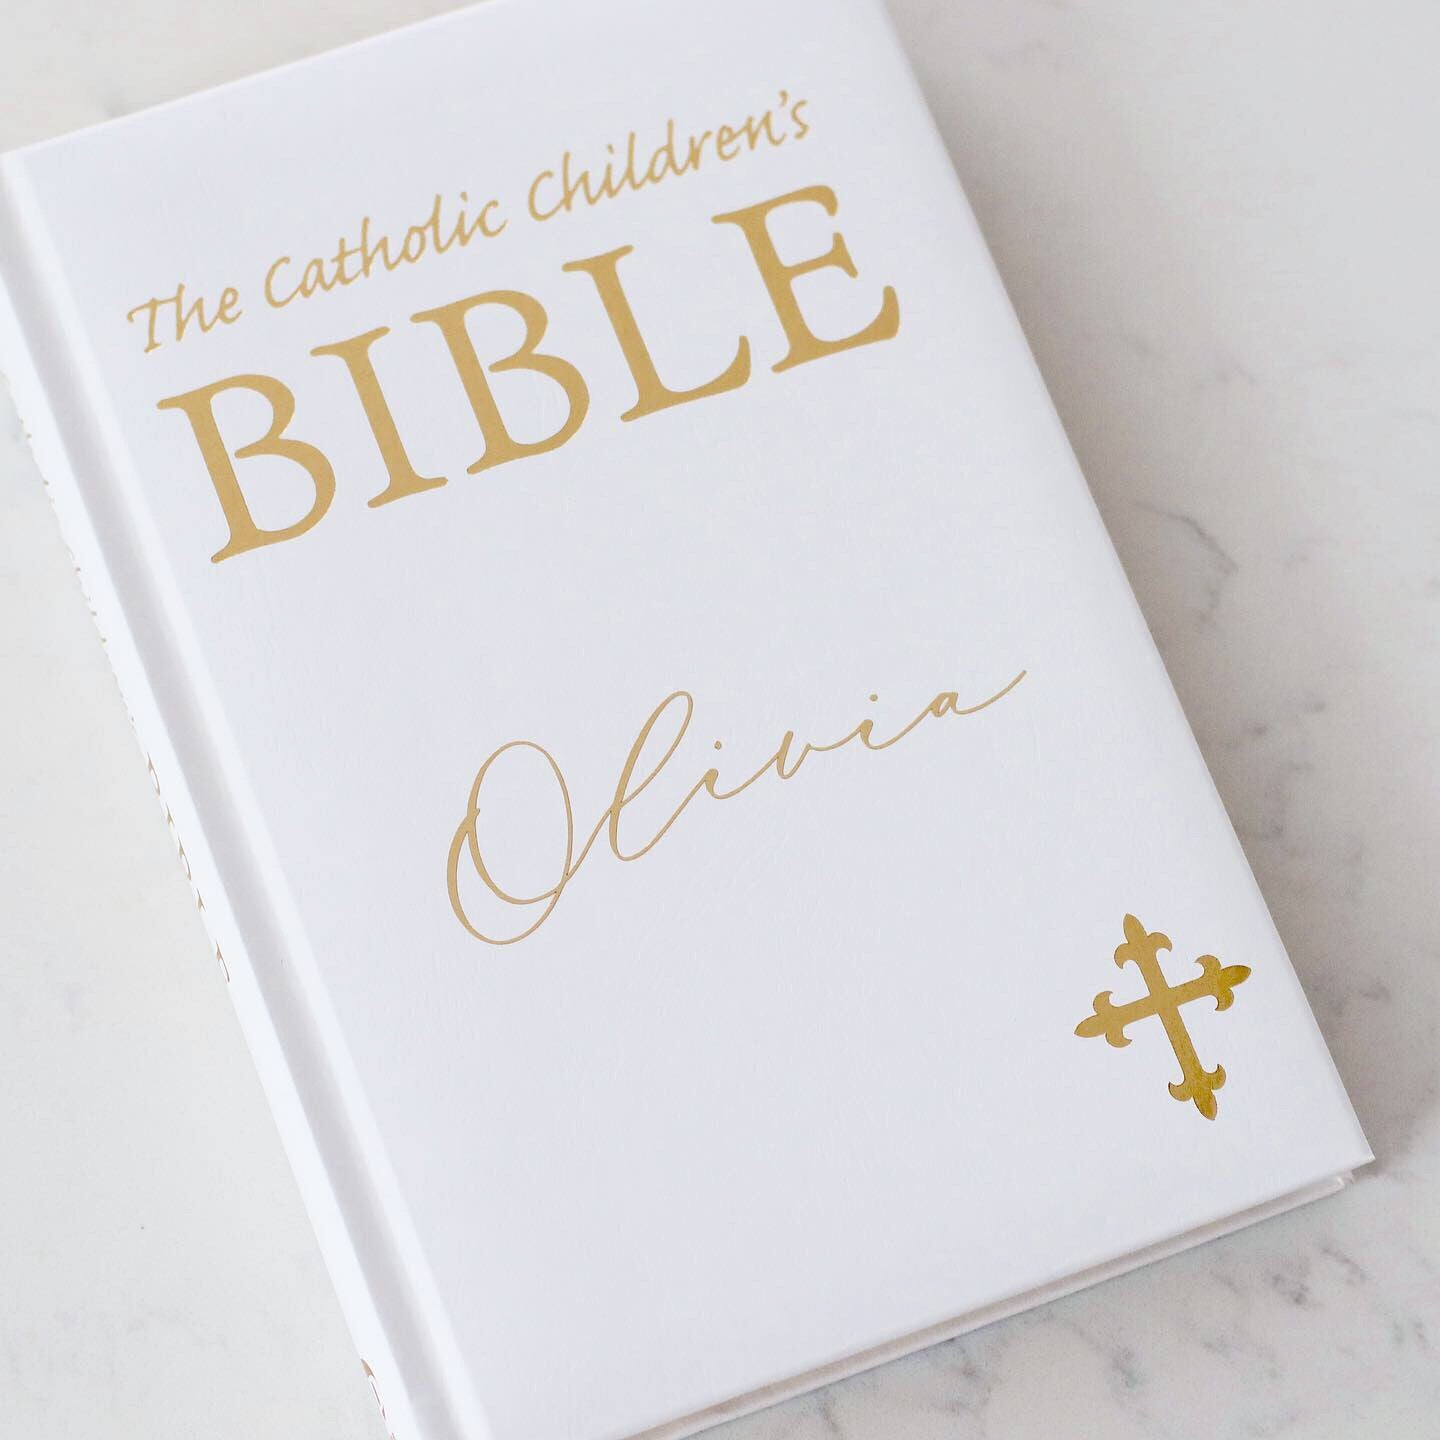 Through the stories this  Catholic Child's First Bible contains, you will get to know God and how much He loves the world and all the beautiful things He has placed in it.